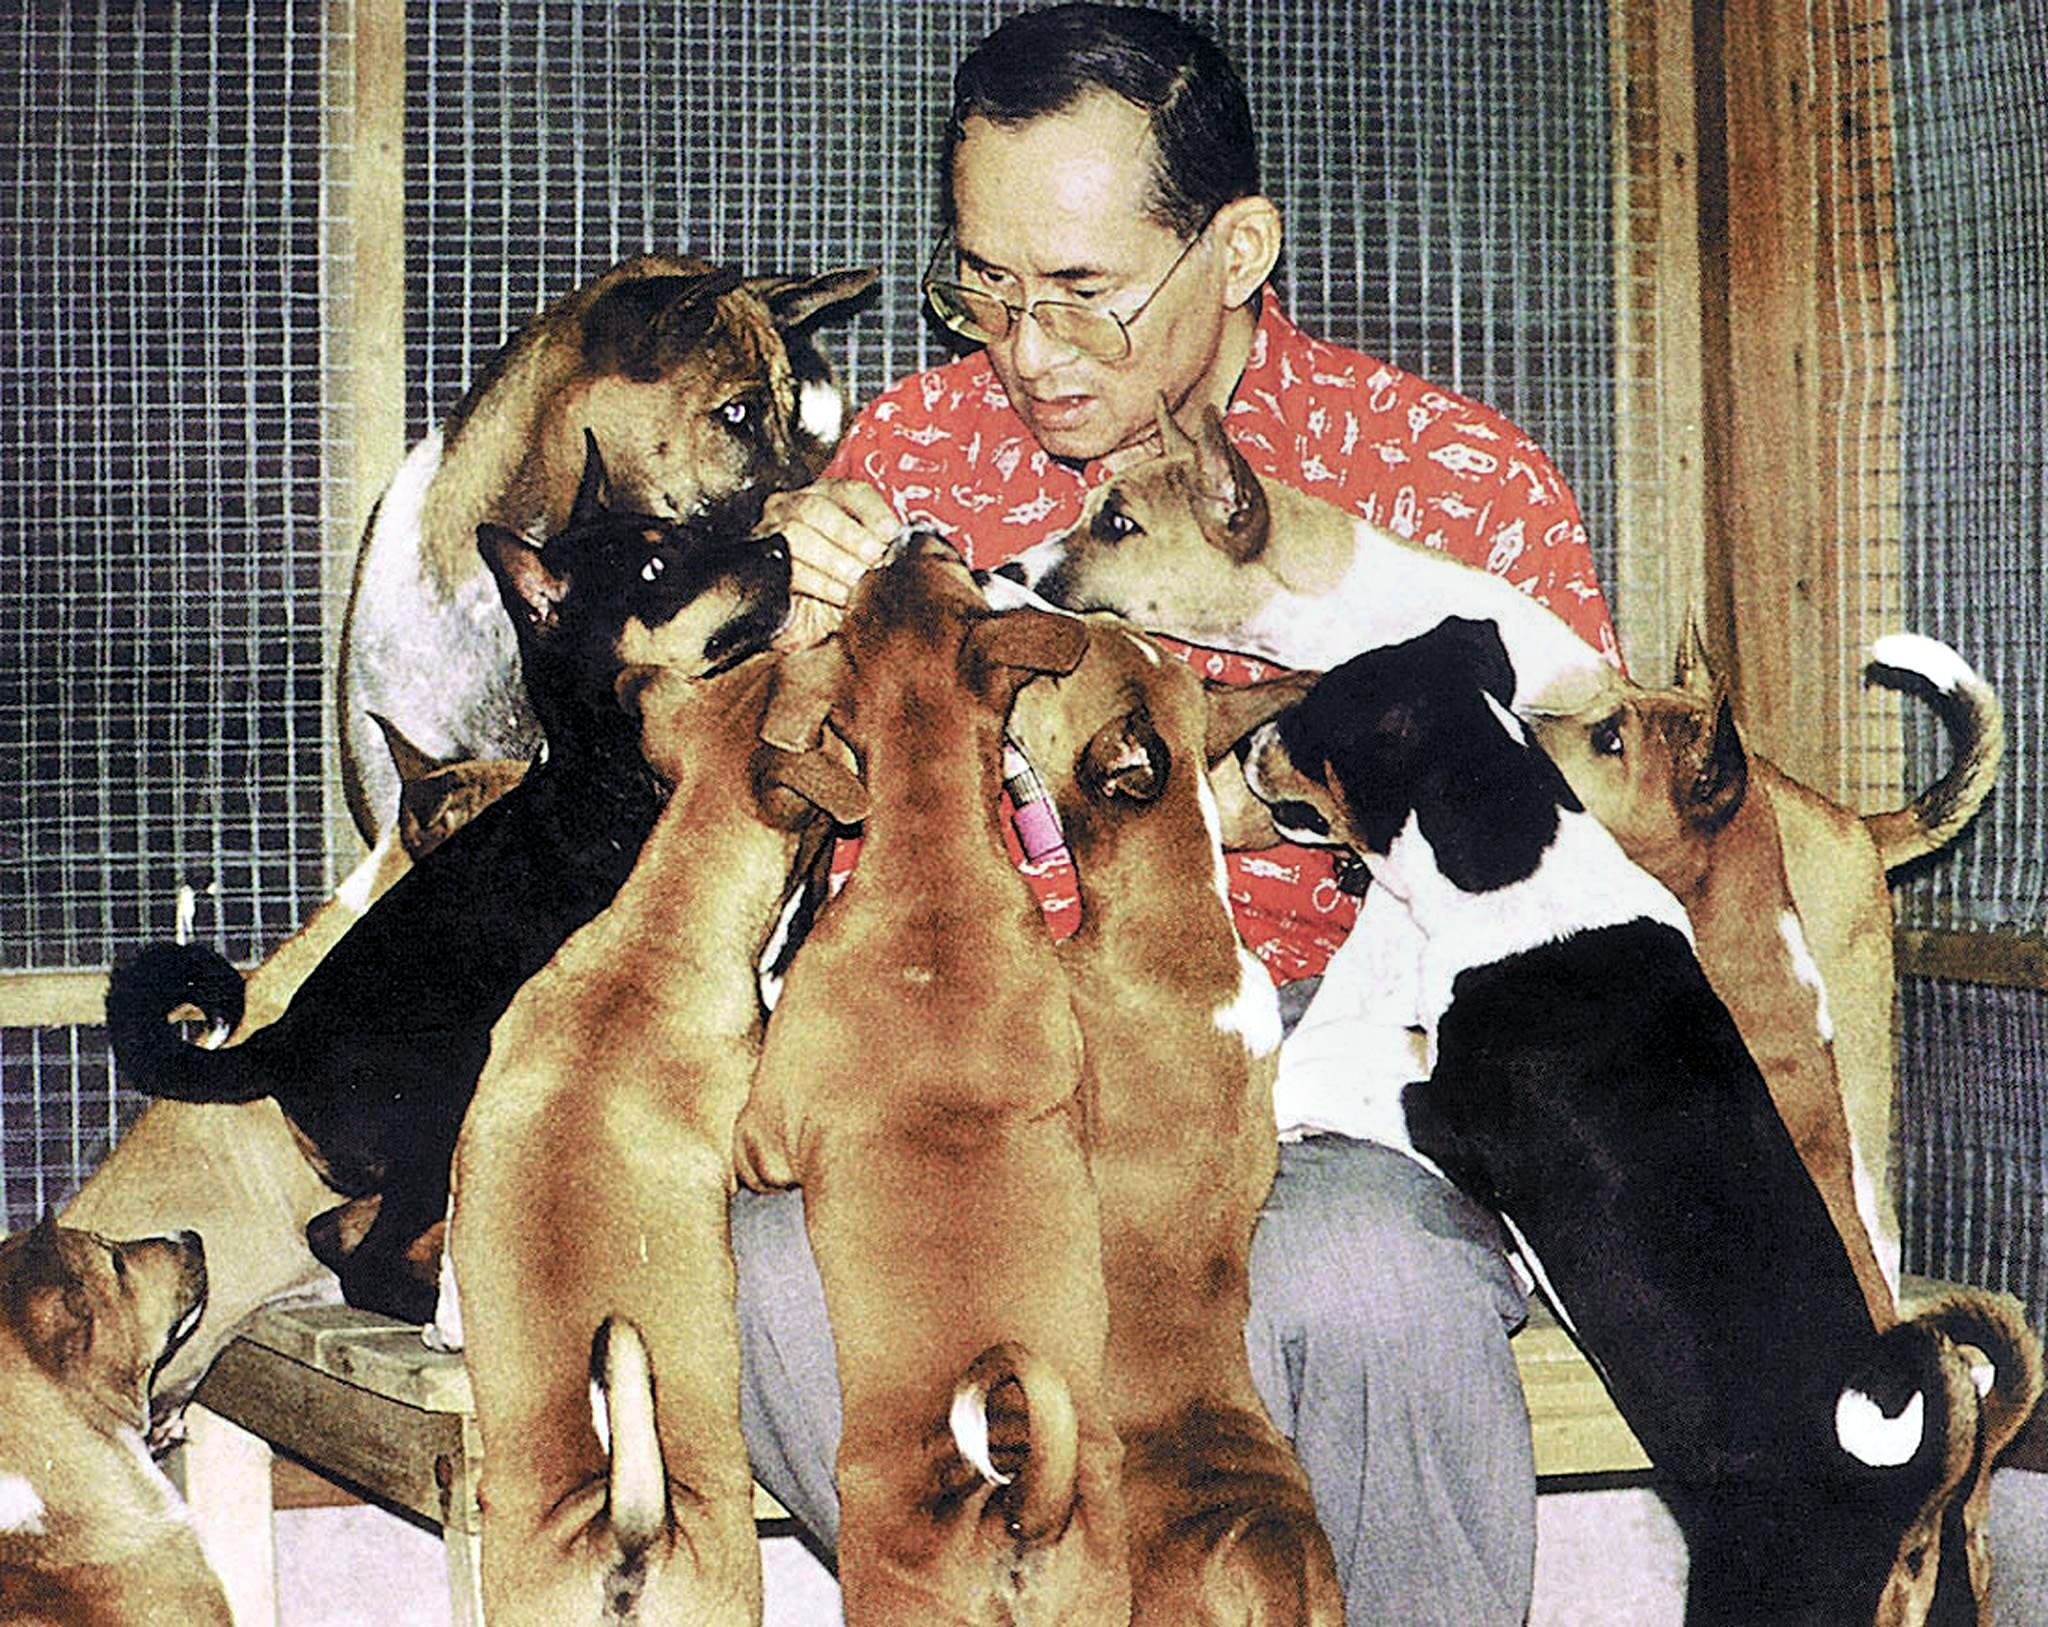 This undated handout photo received 26 December 2002 shows Thai King Bhumibol Adulyadej and his dogs at the Royal Palace in Bangkok.  The tale of a stray dog born on the streets of Bangkok who won the heart of Thailand's much-loved king has recently become the nation's latest publishing sensation.  King Bhumibol himself penned the story of "Thongdaeng", or "Copper" who was sent to the palace as a tiny puppy after the monarch took an interest in the treatment of street dogs in the Bangkok suburb of Wang Tonglarng.       AFP PHOTO/THAI ROYAL BUREAU/HO / AFP PHOTO / ROYAL PALACE